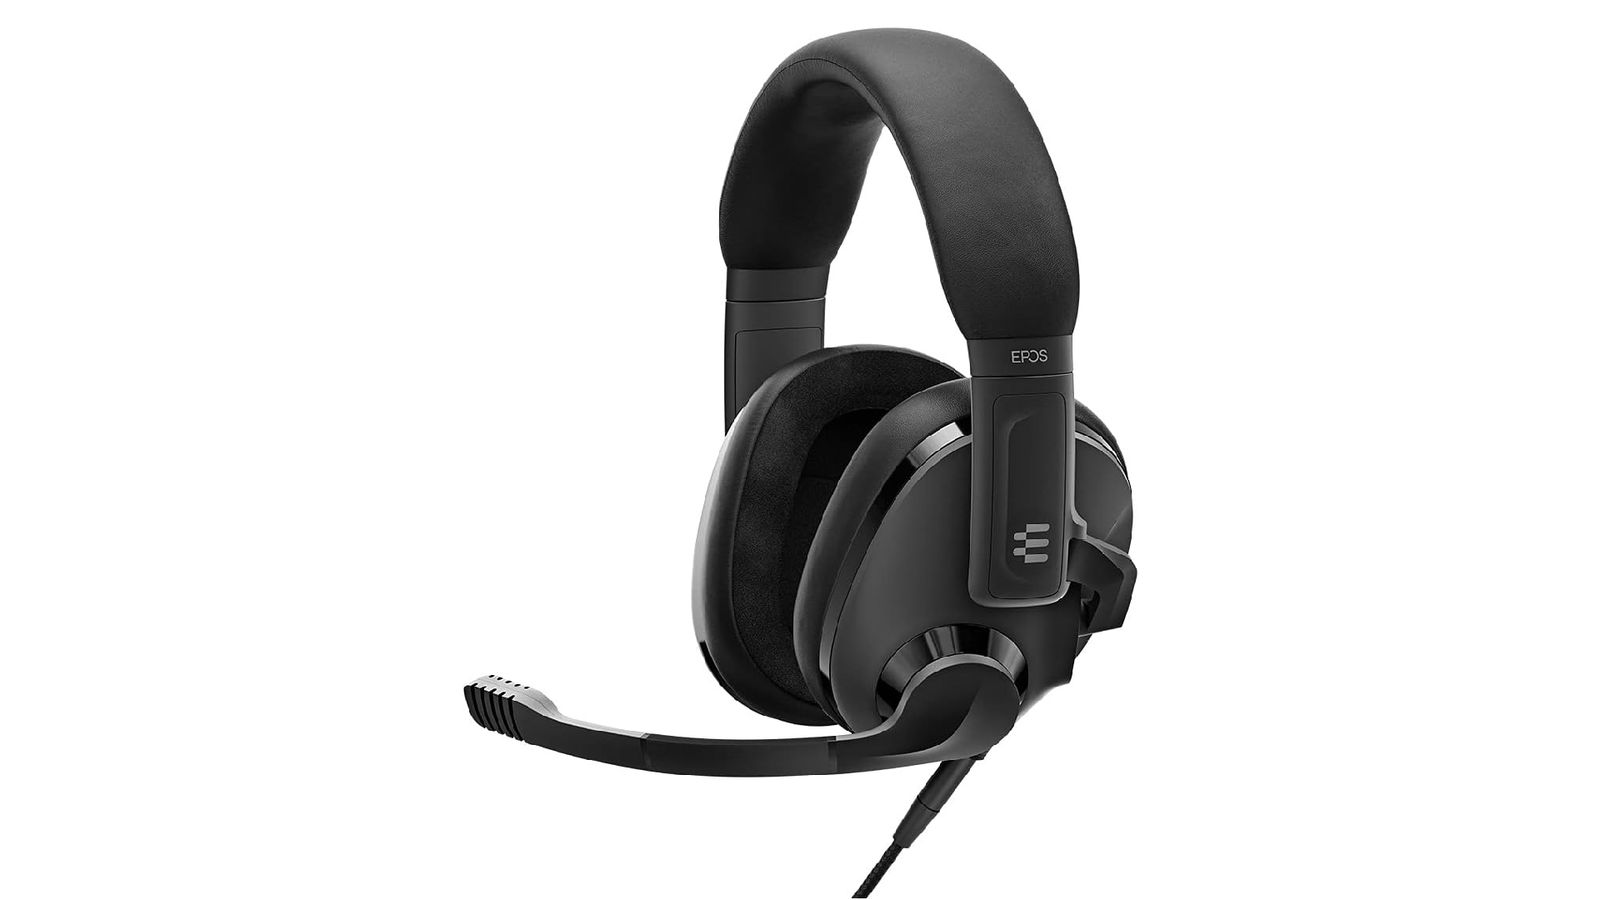 EPOS H3 product image of a black over-ear wired headset featuring a mic that extends around the front.